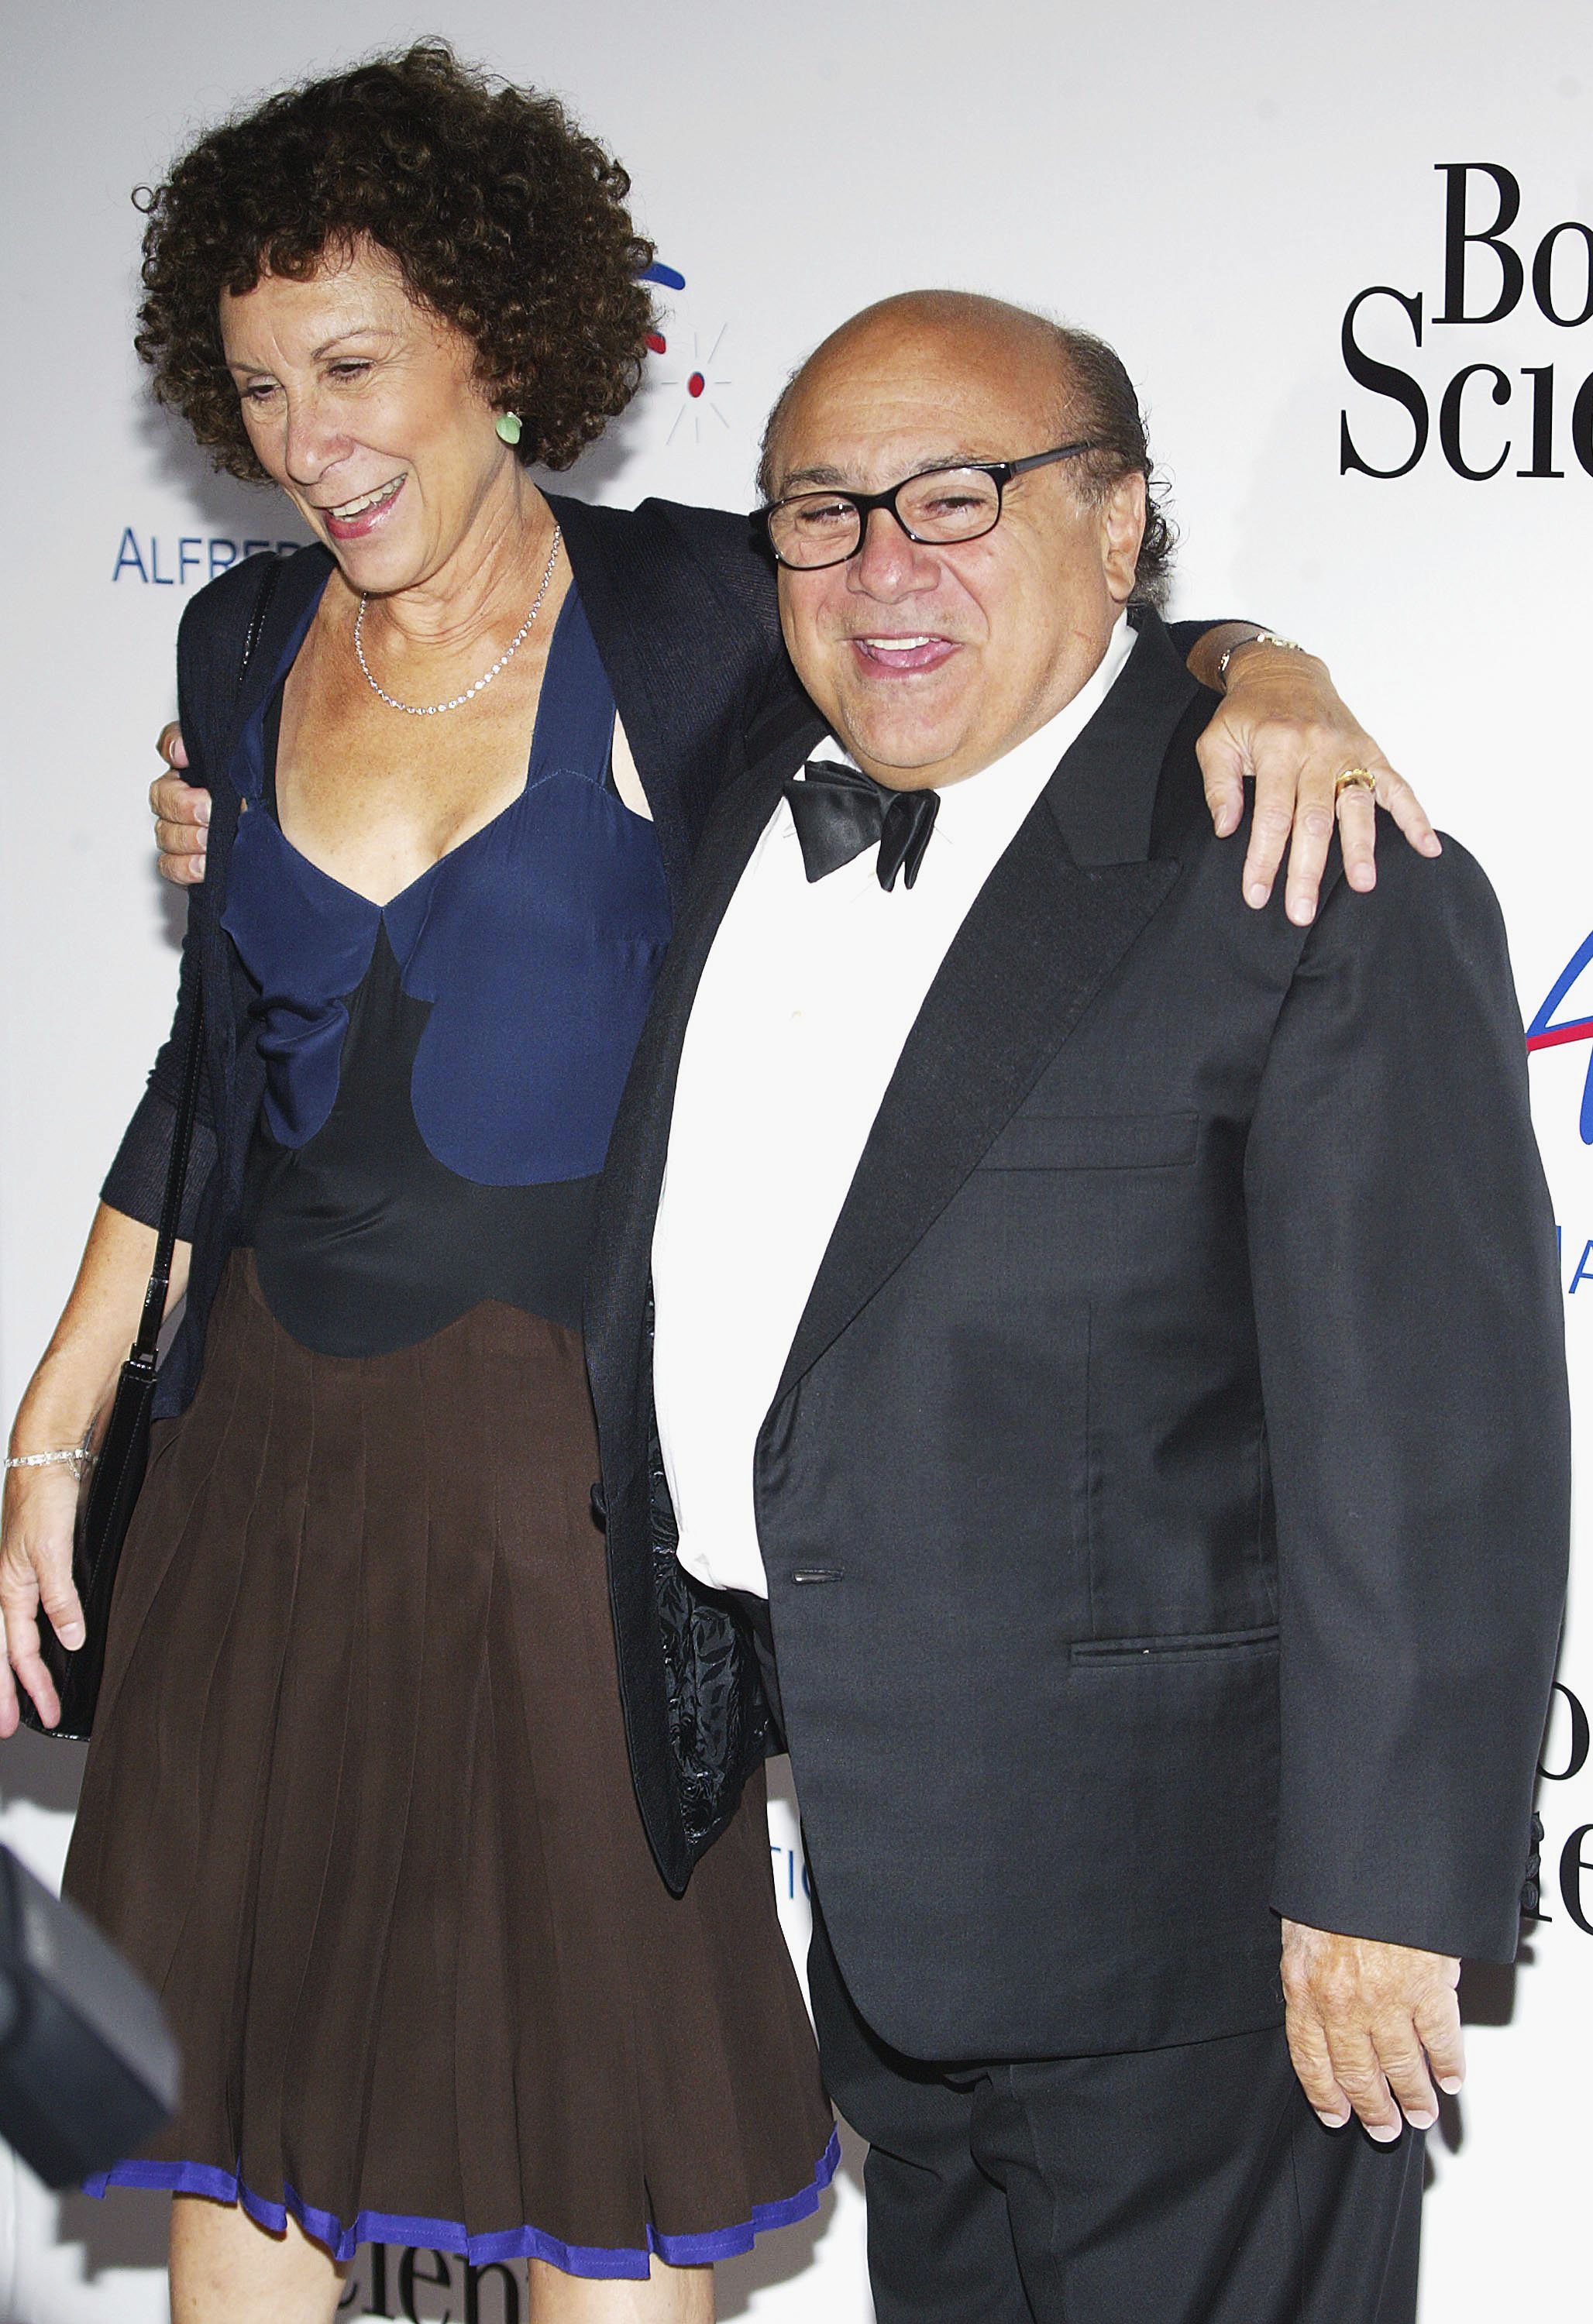 Rhea Perlman and Dannny Devito attend The Alfred Mann Foundation's Evening of Innovation and Inspiration on September 10, 2005 | Photo: GettyImages 